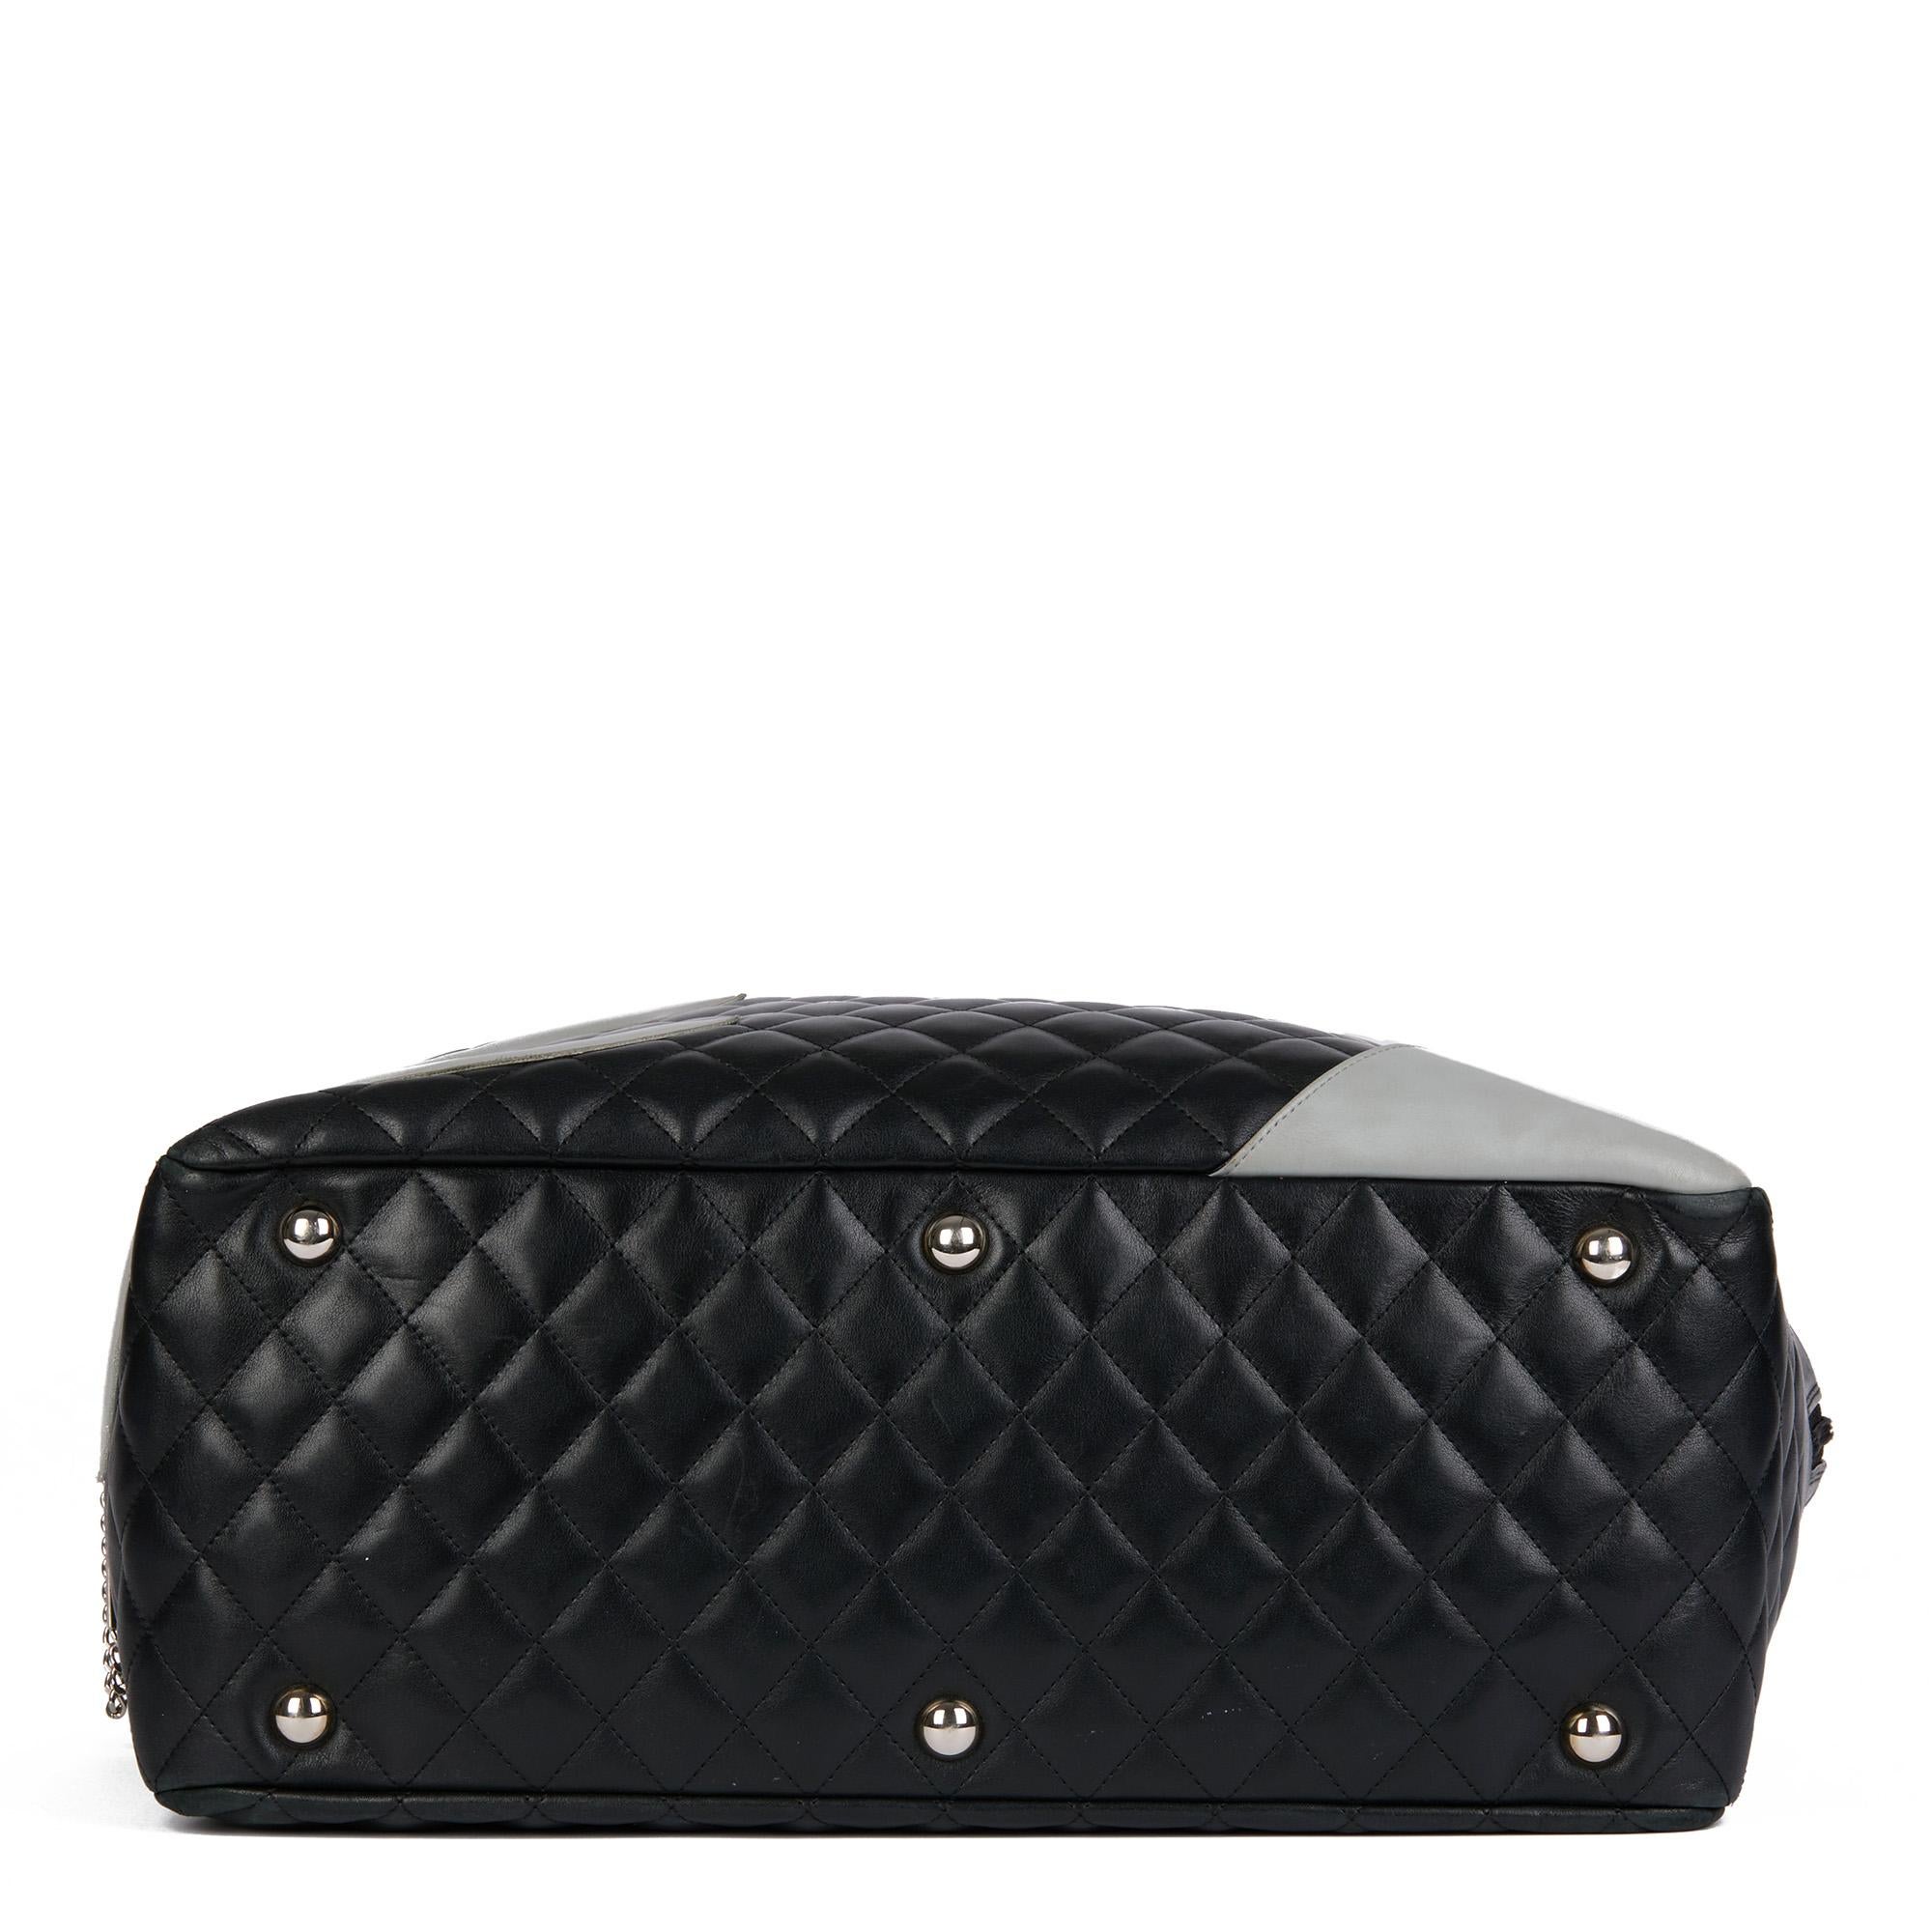 CHANEL Black Quilted & Grey Smooth Calfskin Leather Vintage Large Cambon 2